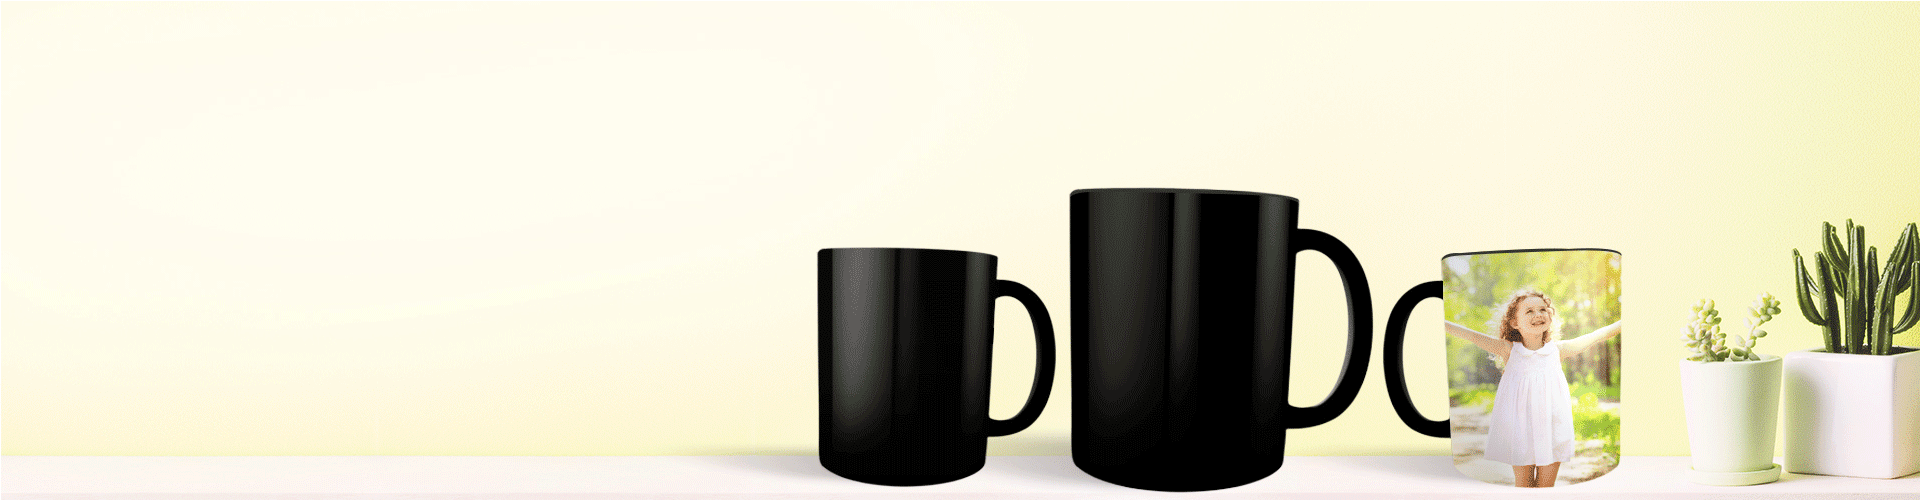 GIFT A PHOTO MUG WITHOUT PAYING FOR IT